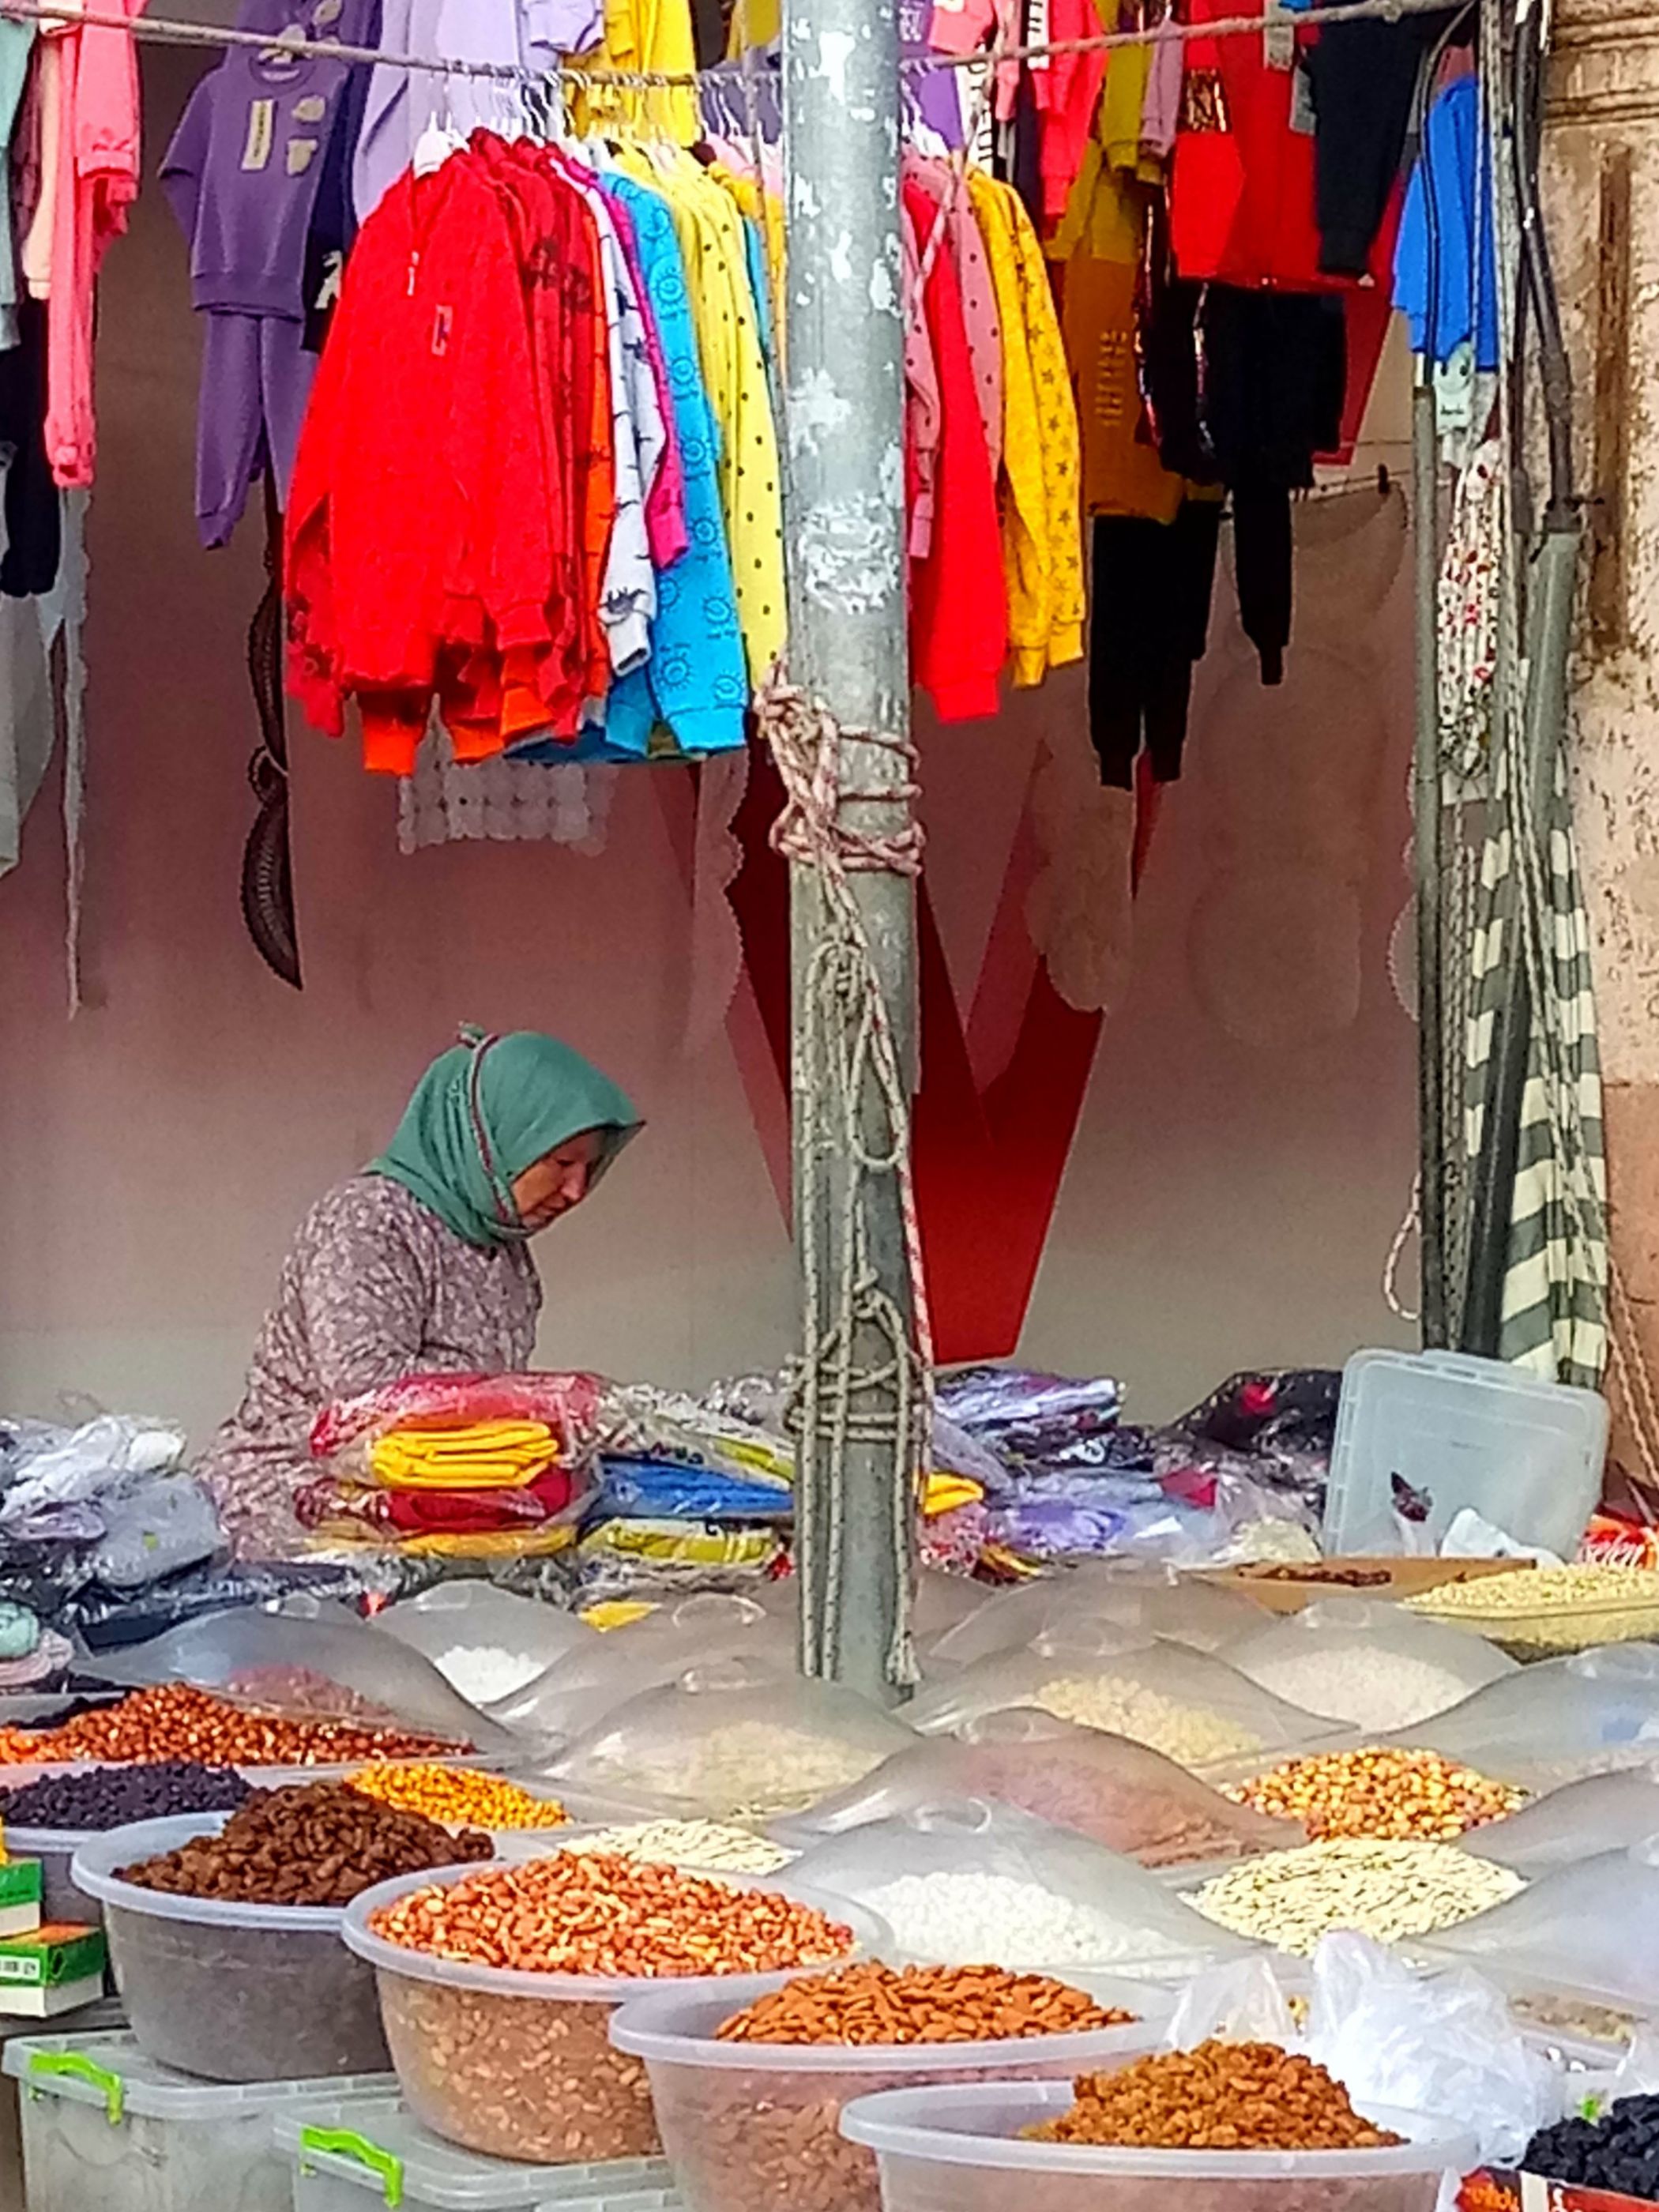 Peasant women in the market